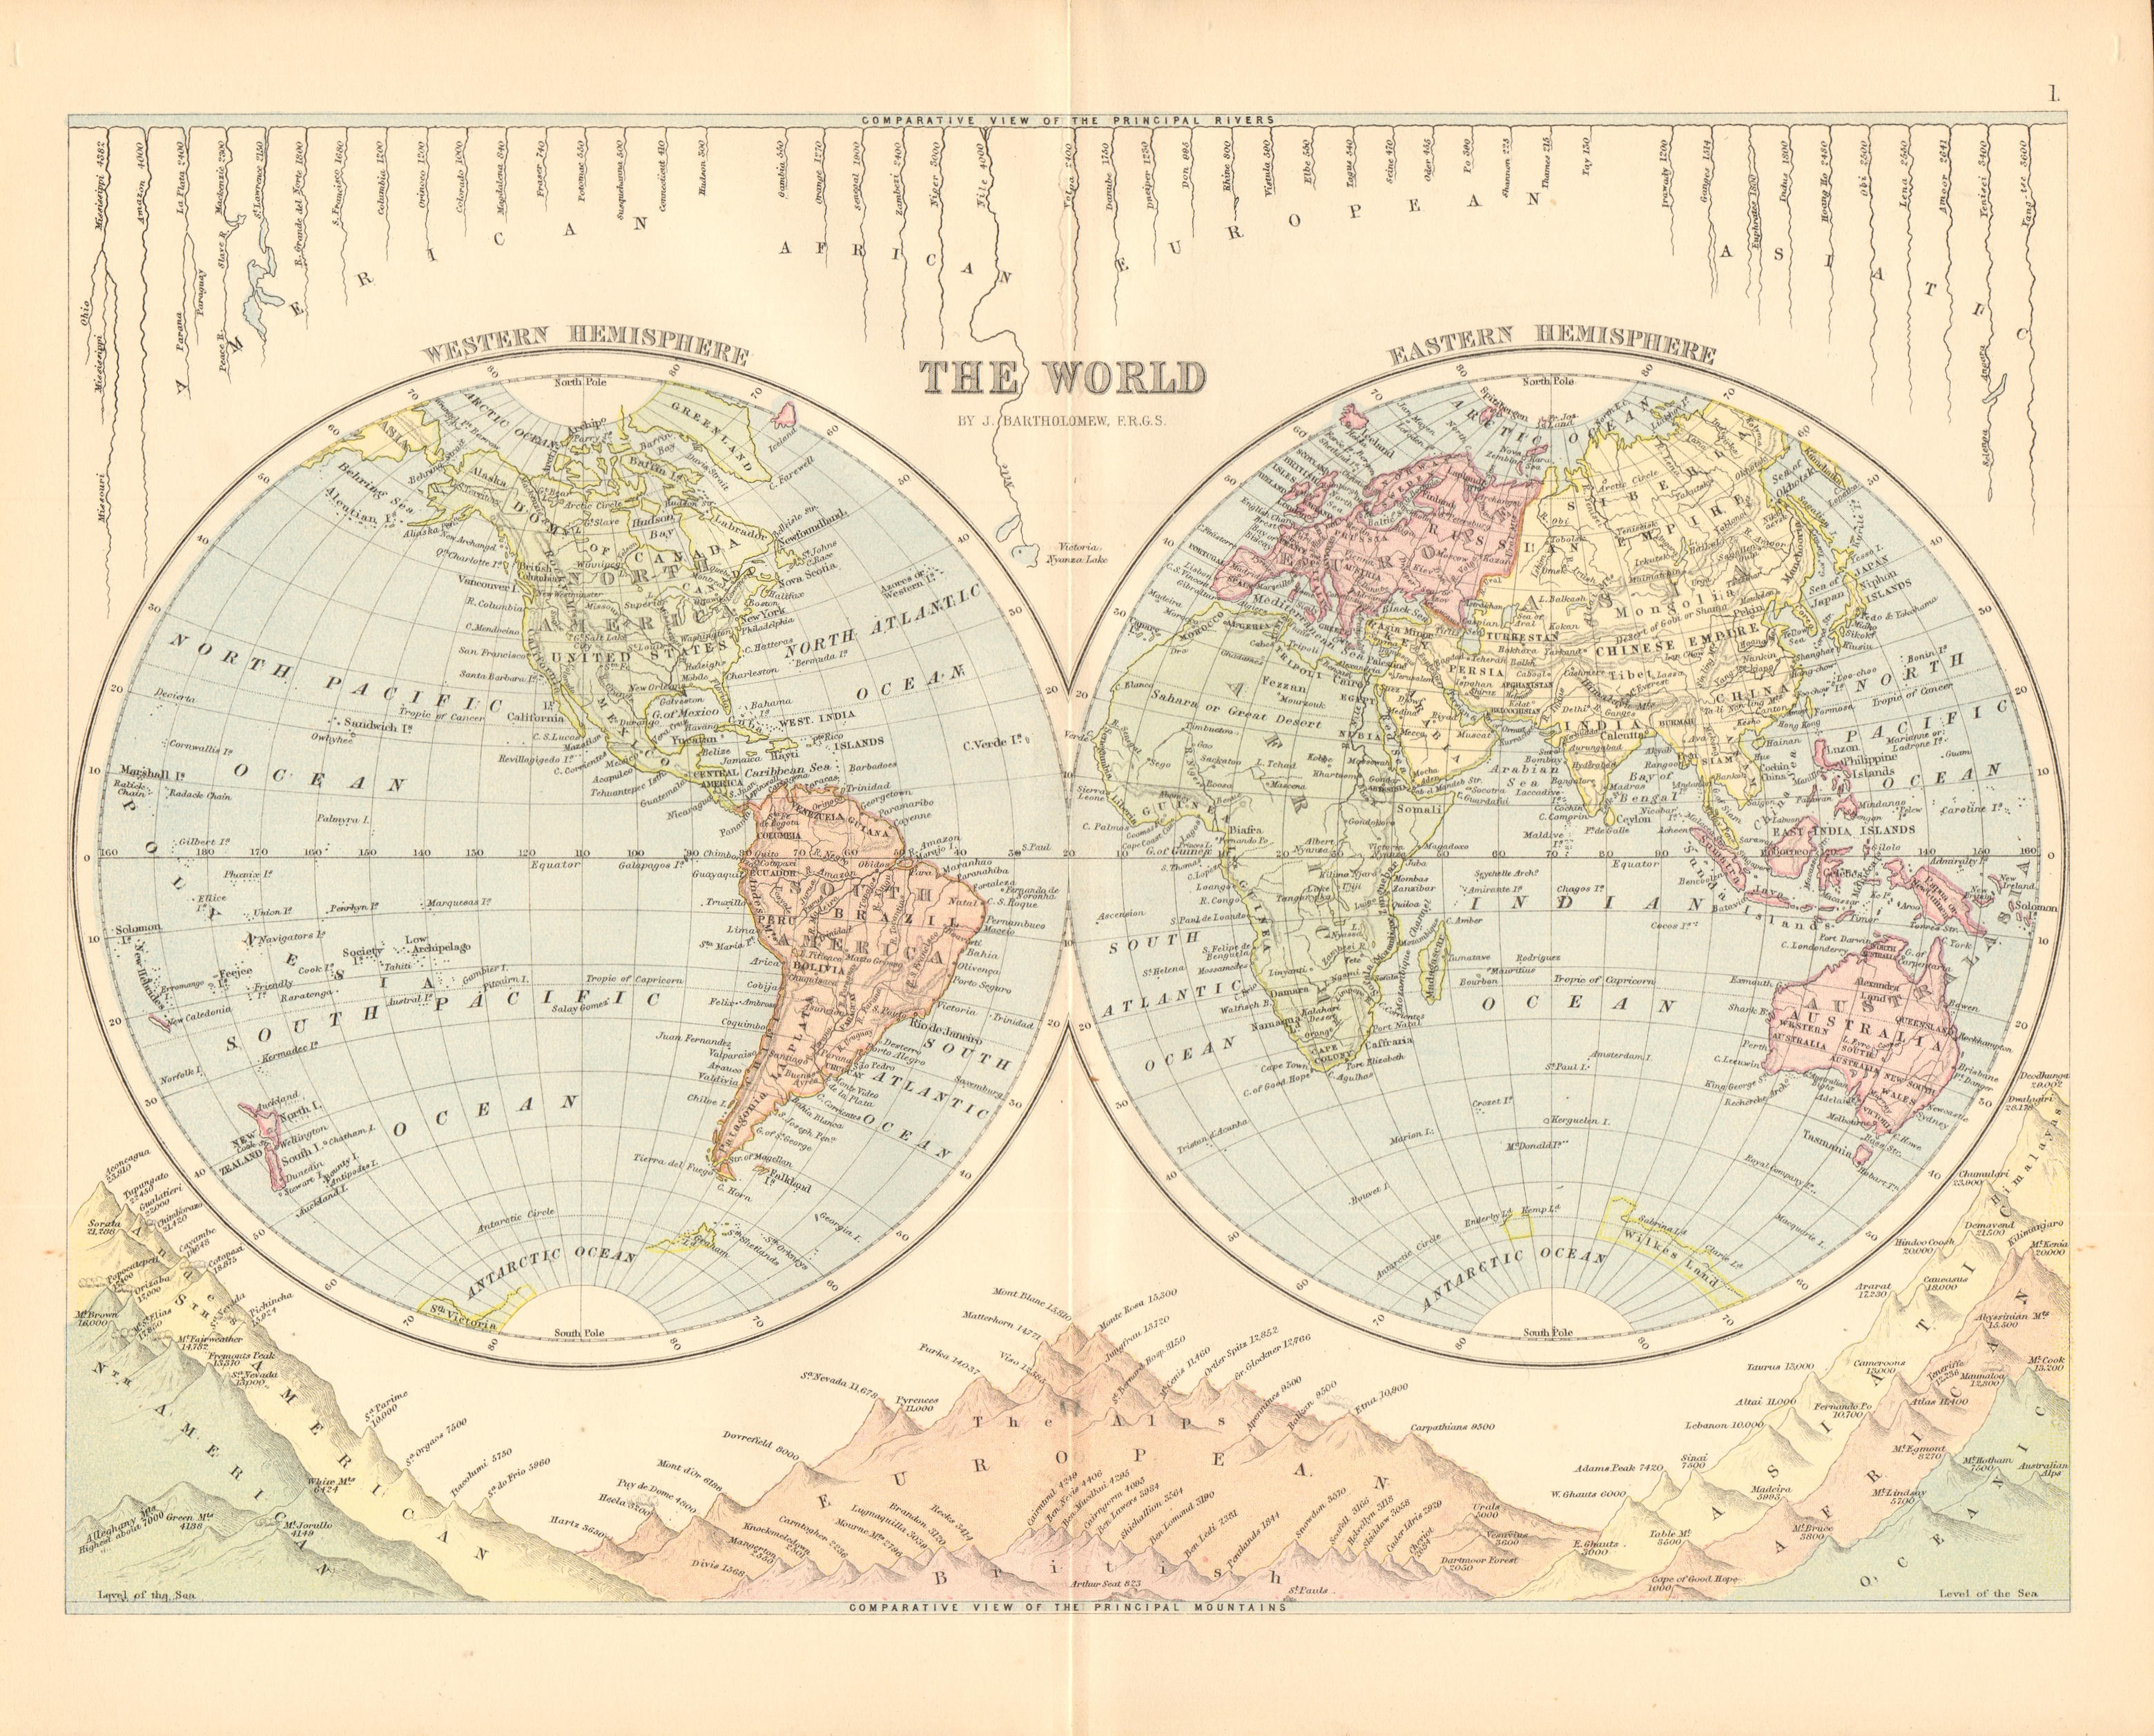 Associate Product THE WORLD IN HEMISPHERES. River lengths Mountain heights. BARTHOLOMEW 1876 map